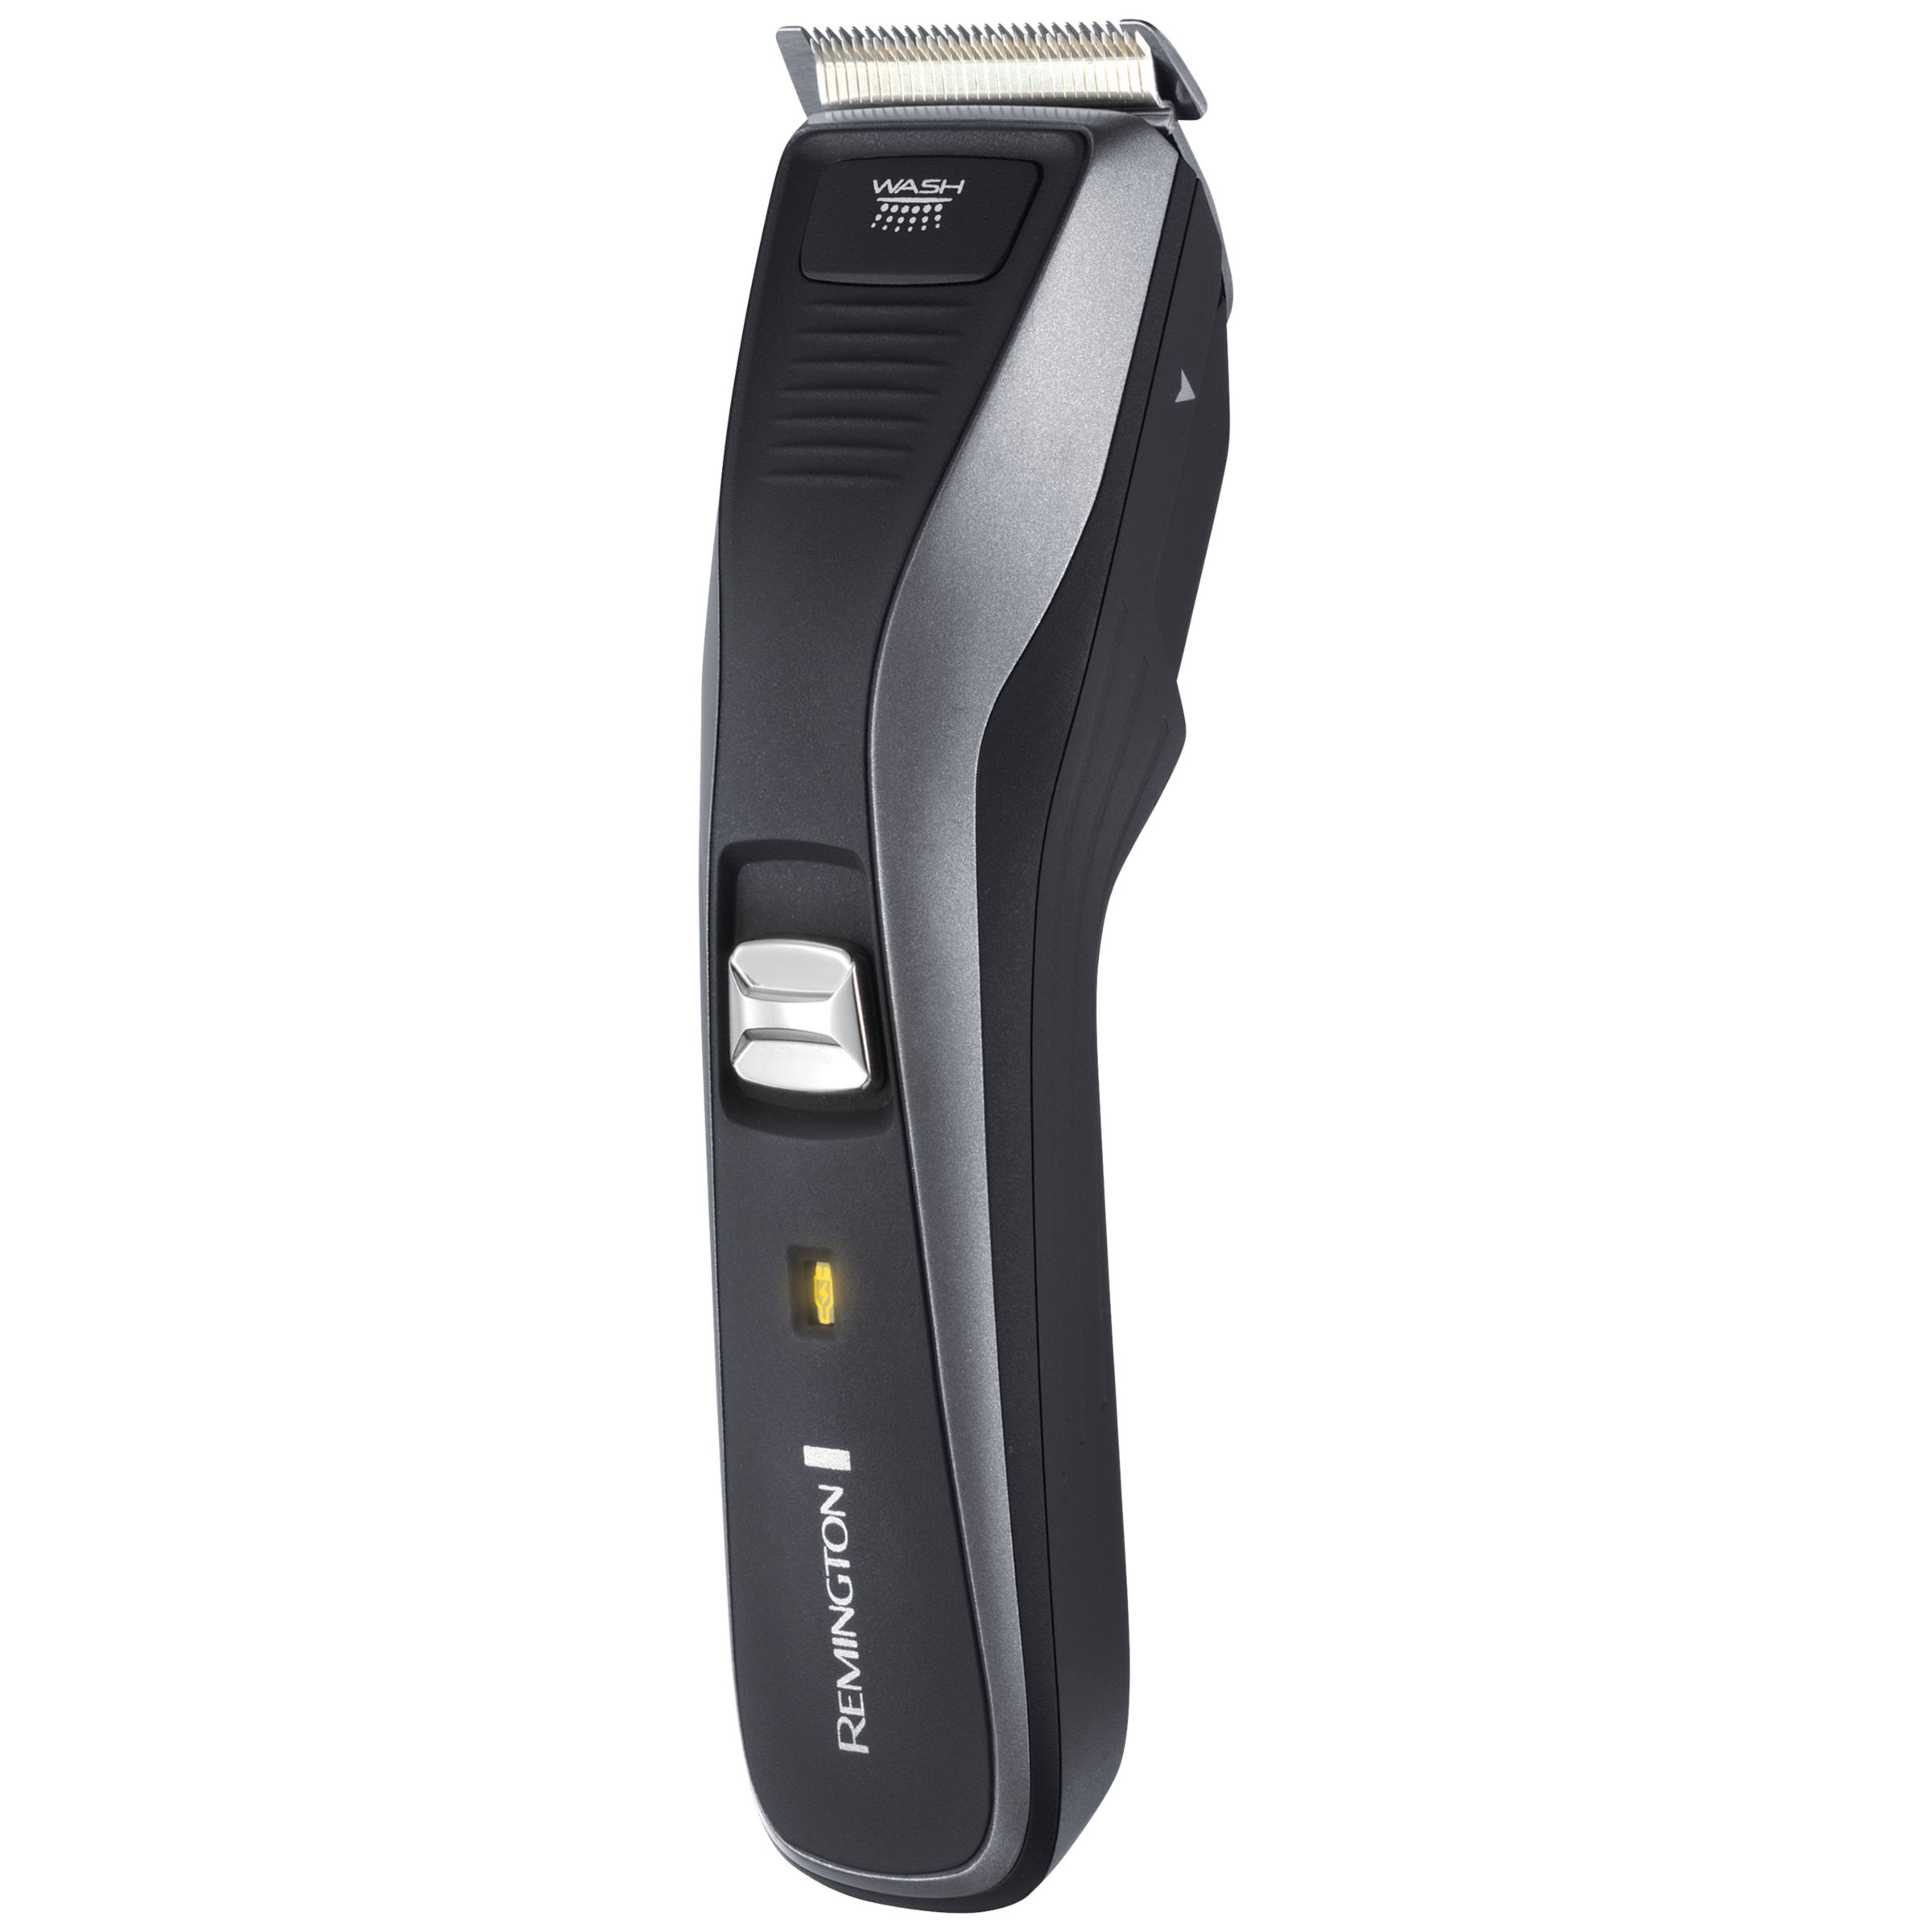 42mm hair clippers